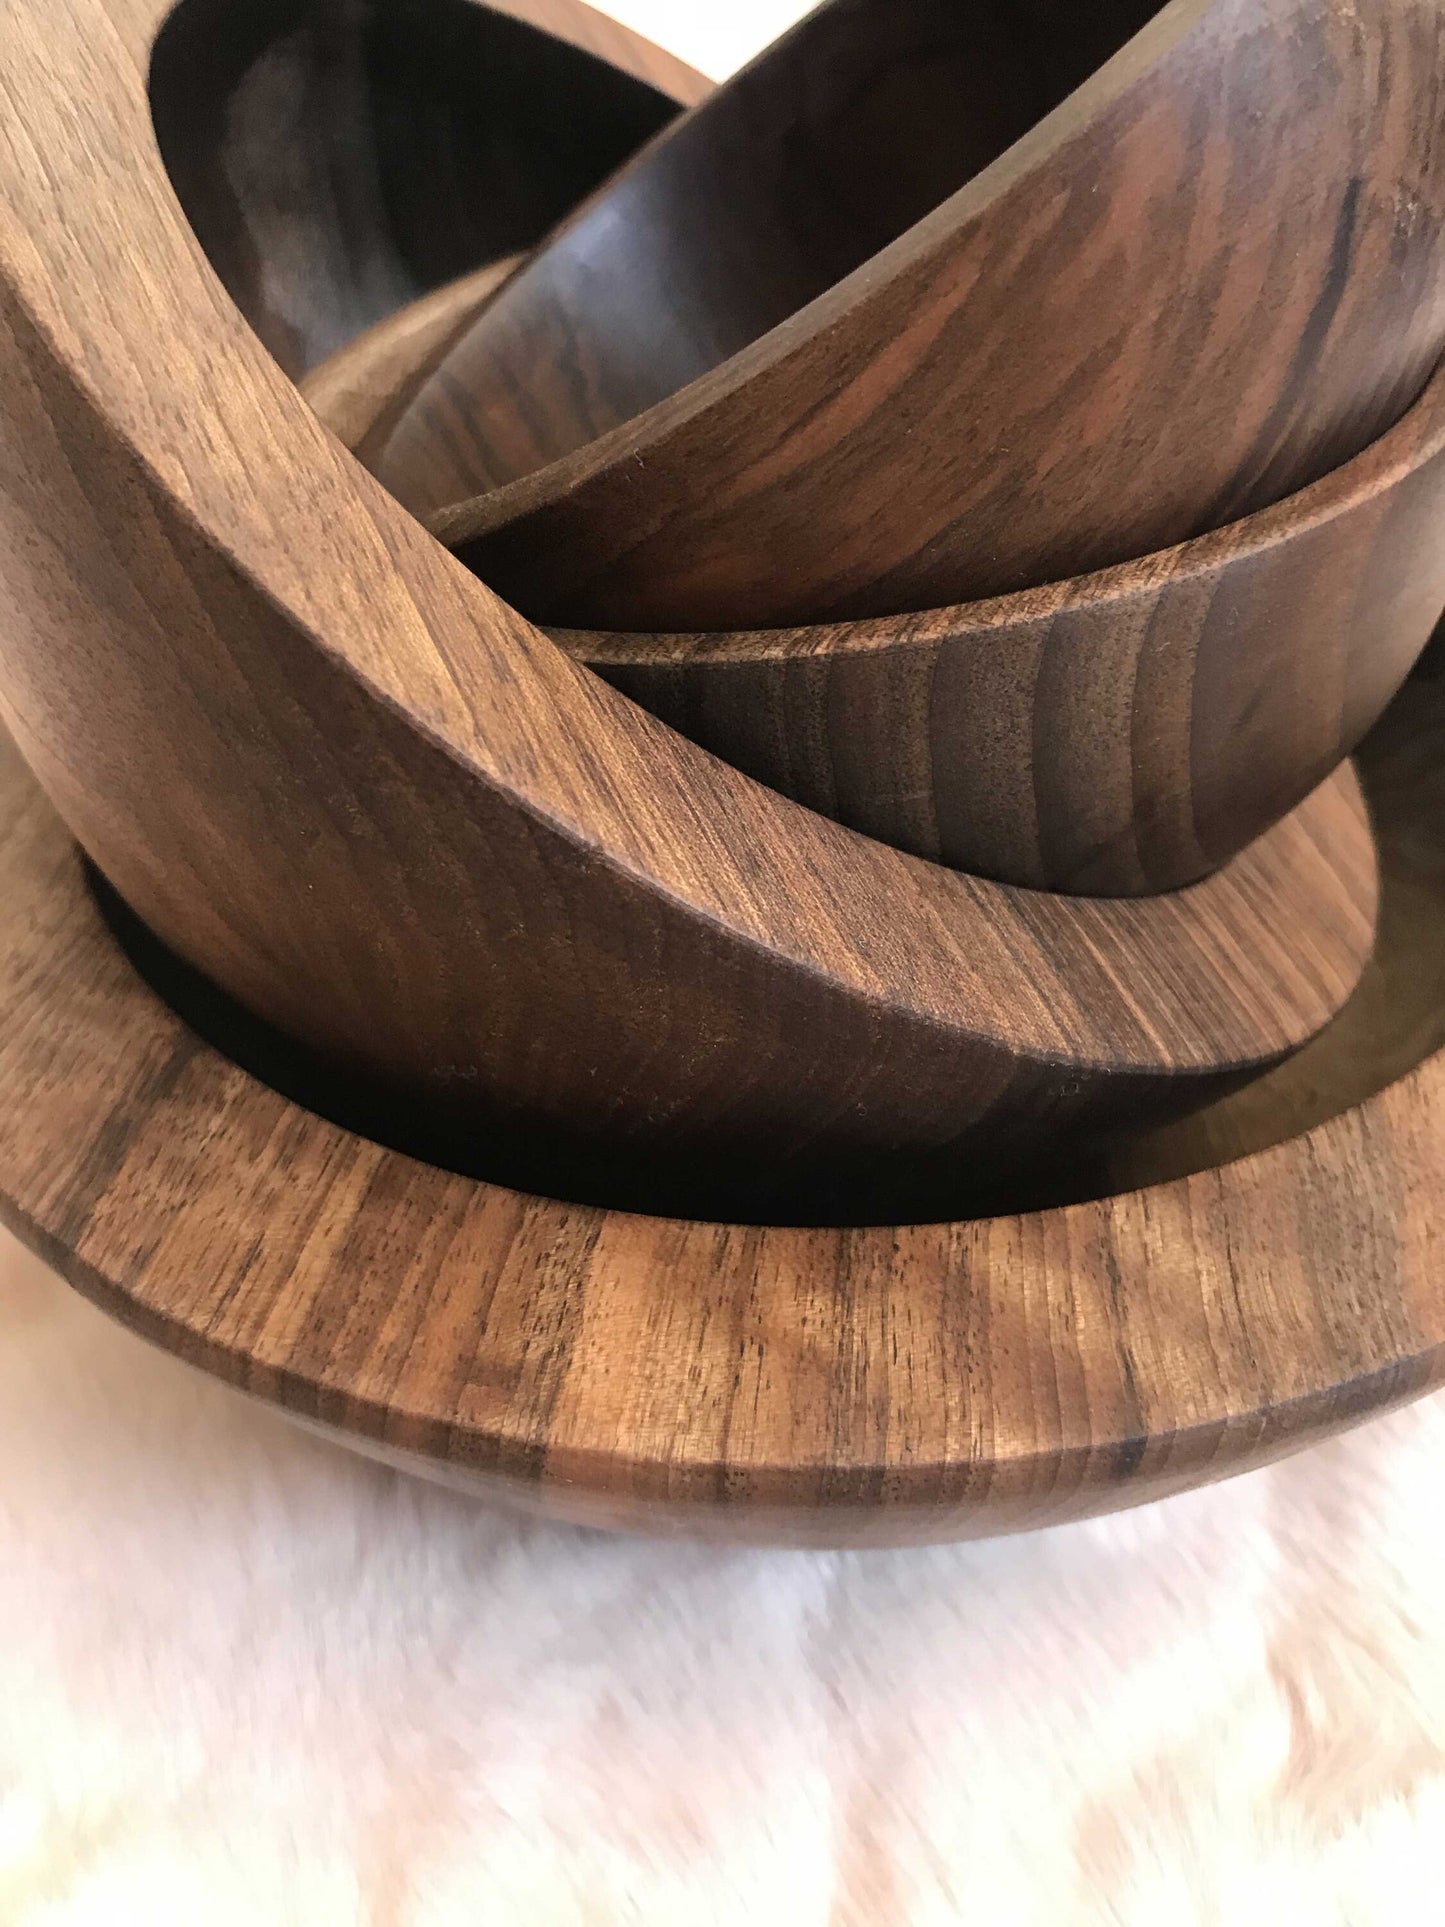 Set of 4 Round Serving walnut Tray dry fruit Saucer,Dinner Plate,wooden design,perfect for dry fruits,green salad,popcorn,pastries,bread